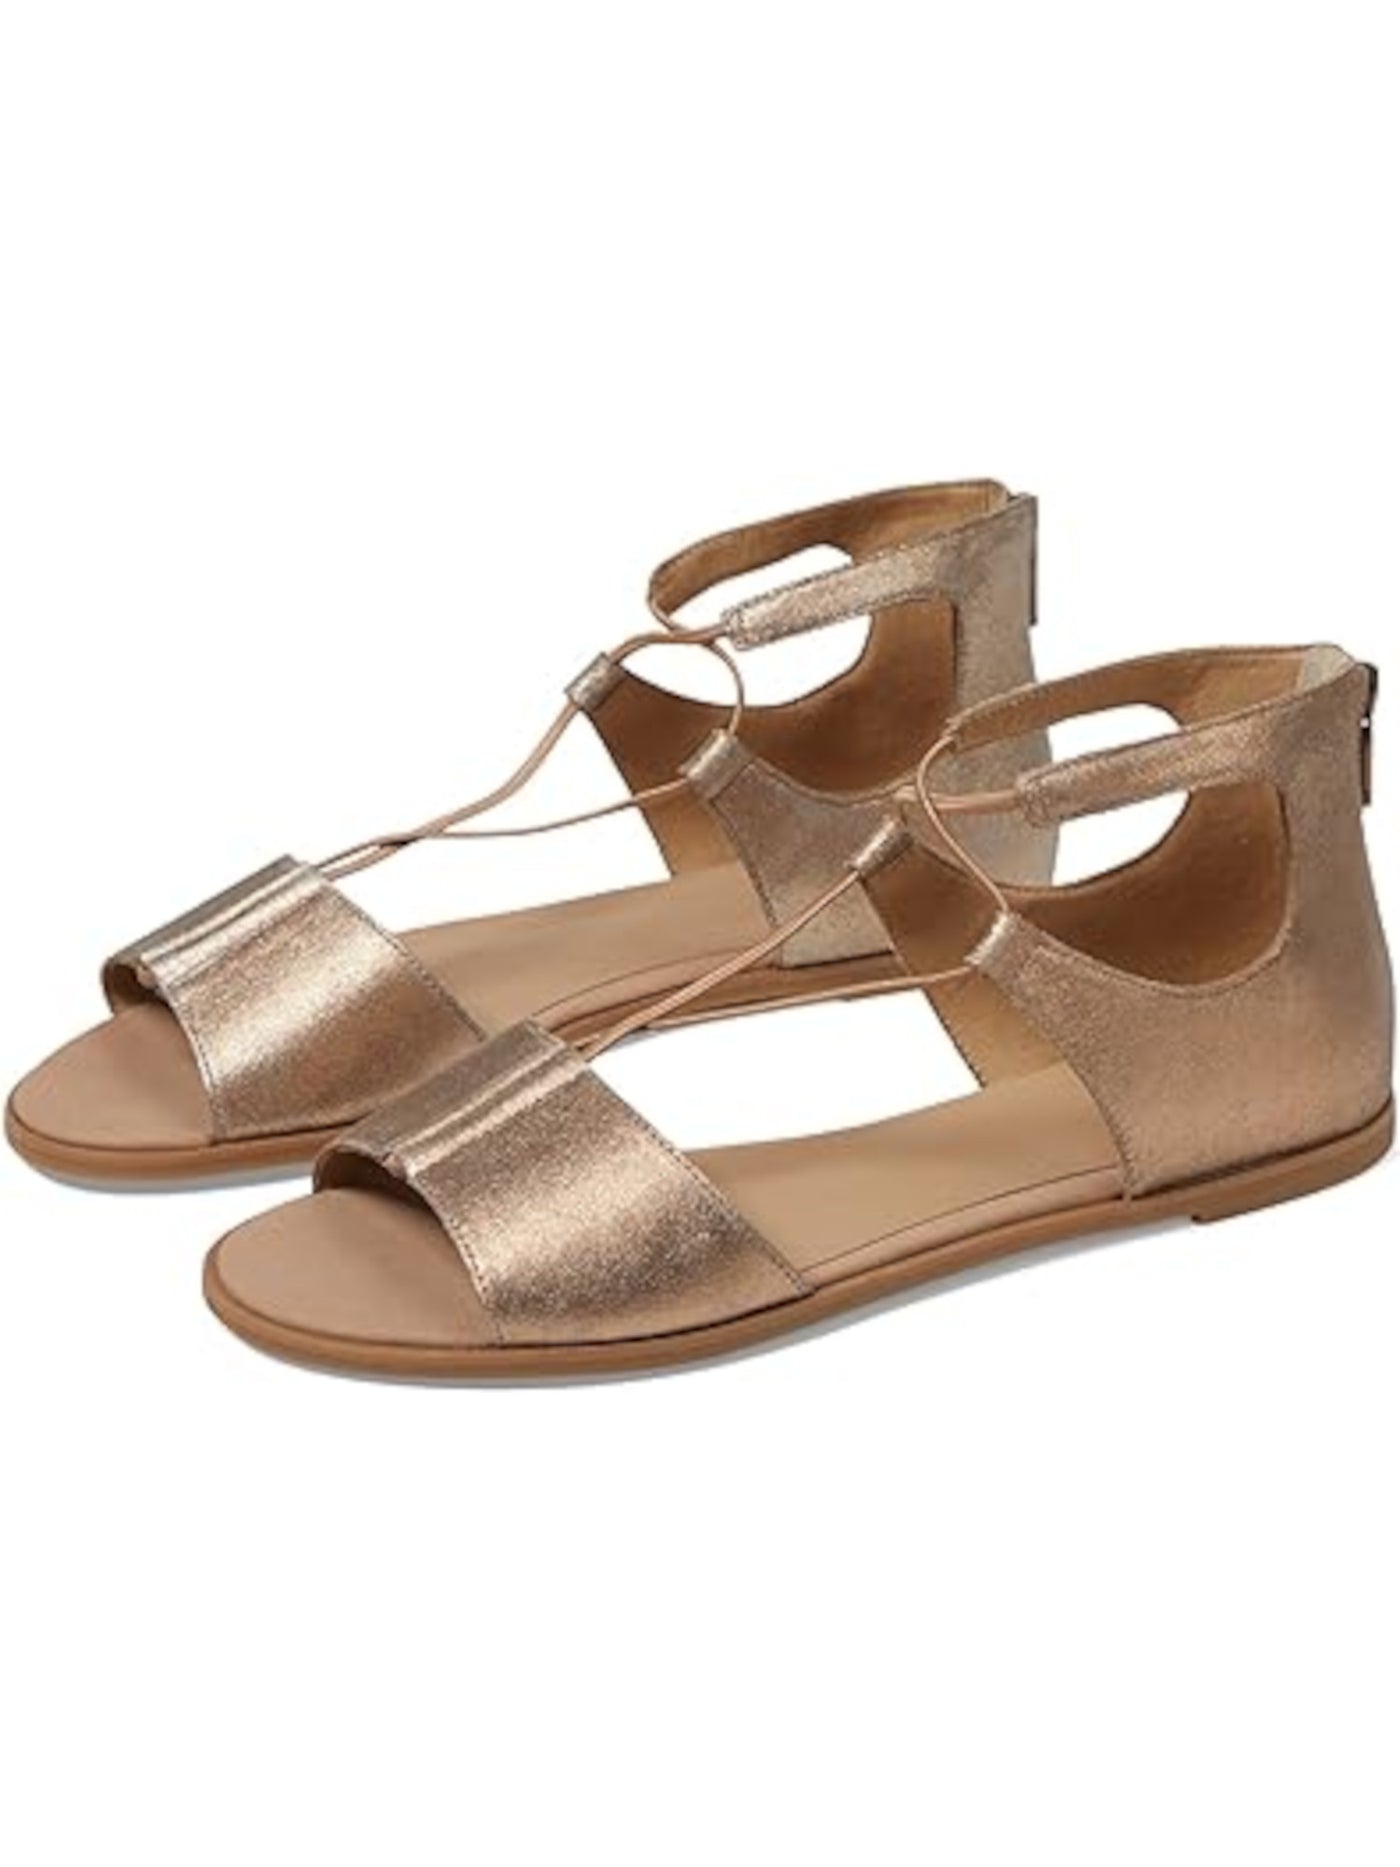 EILEEN FISHER Womens Gold Elastic Straps Padded Rose Open Toe Zip-Up Leather Sandals Shoes 11 M